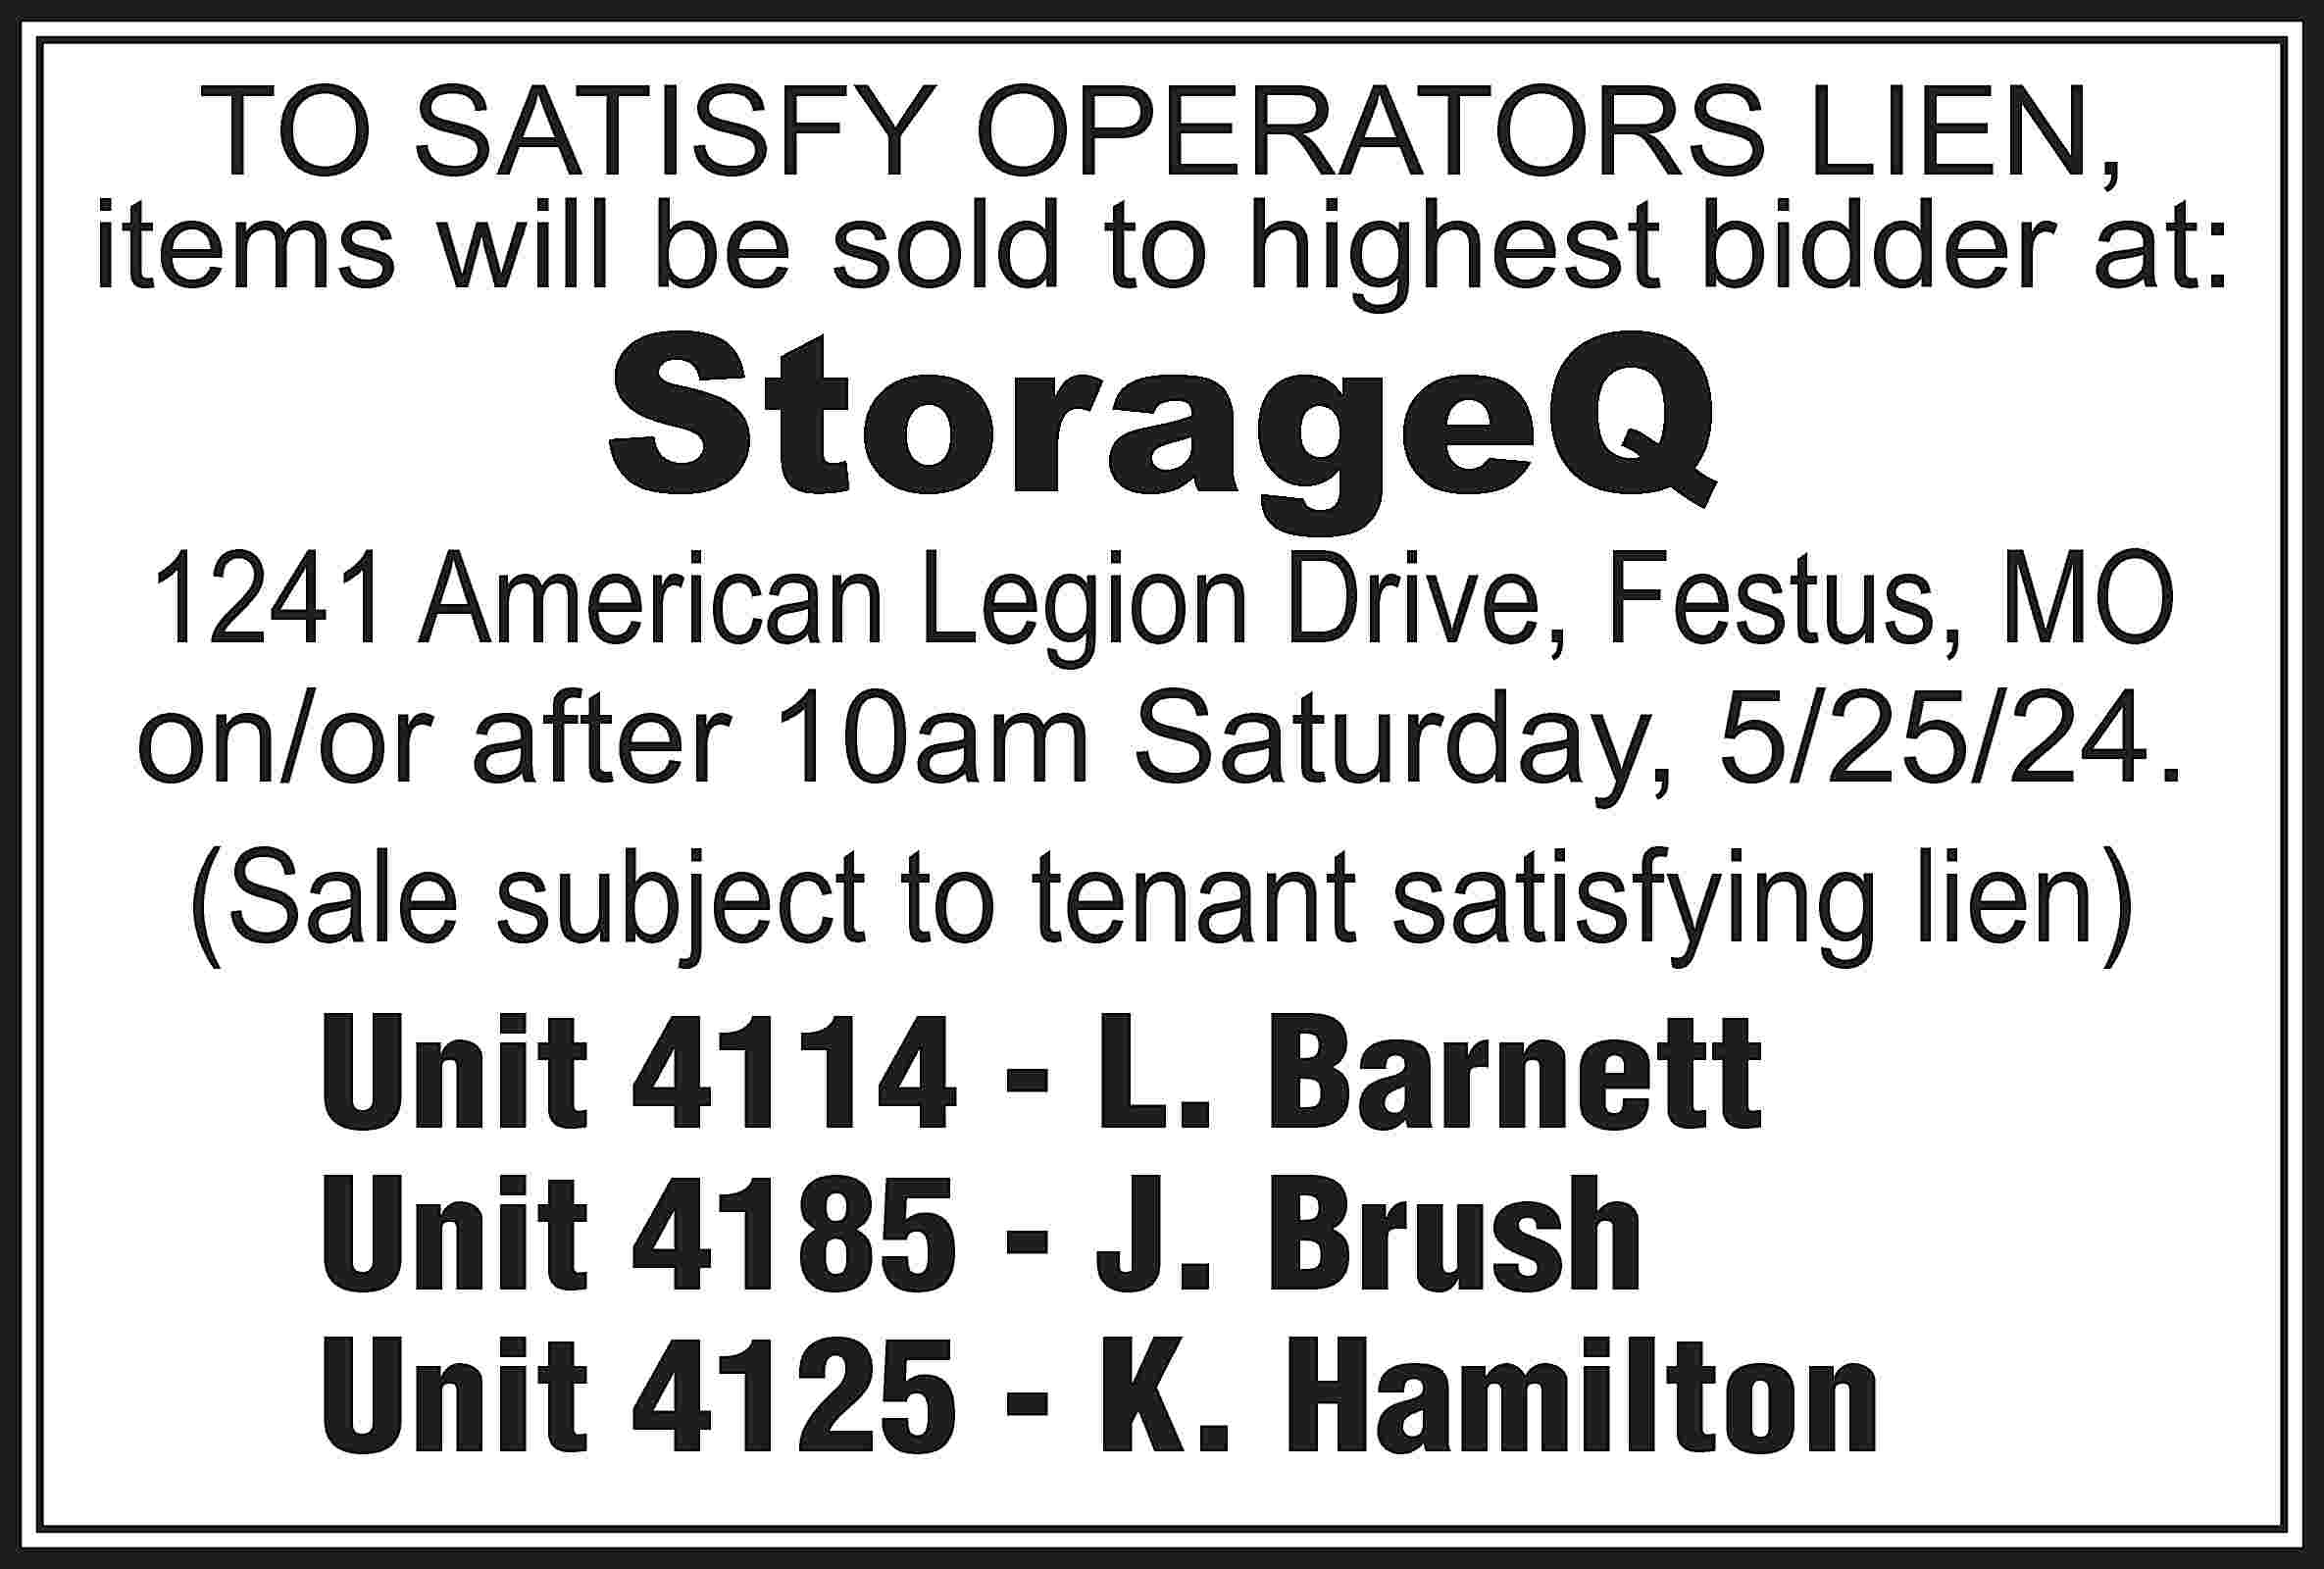 TO SATISFY OPERATORS LIEN, items  TO SATISFY OPERATORS LIEN, items will be sold to highest bidder at: StorageQ 1241 American Legion Drive, Festus, MO on/or after 10am Saturday, 5/25/24. (Sale subject to tenant satisfying lien) Unit 4114 - L. Barnett Unit 4185 - J. Brush Unit 4125 - K. Hamilton